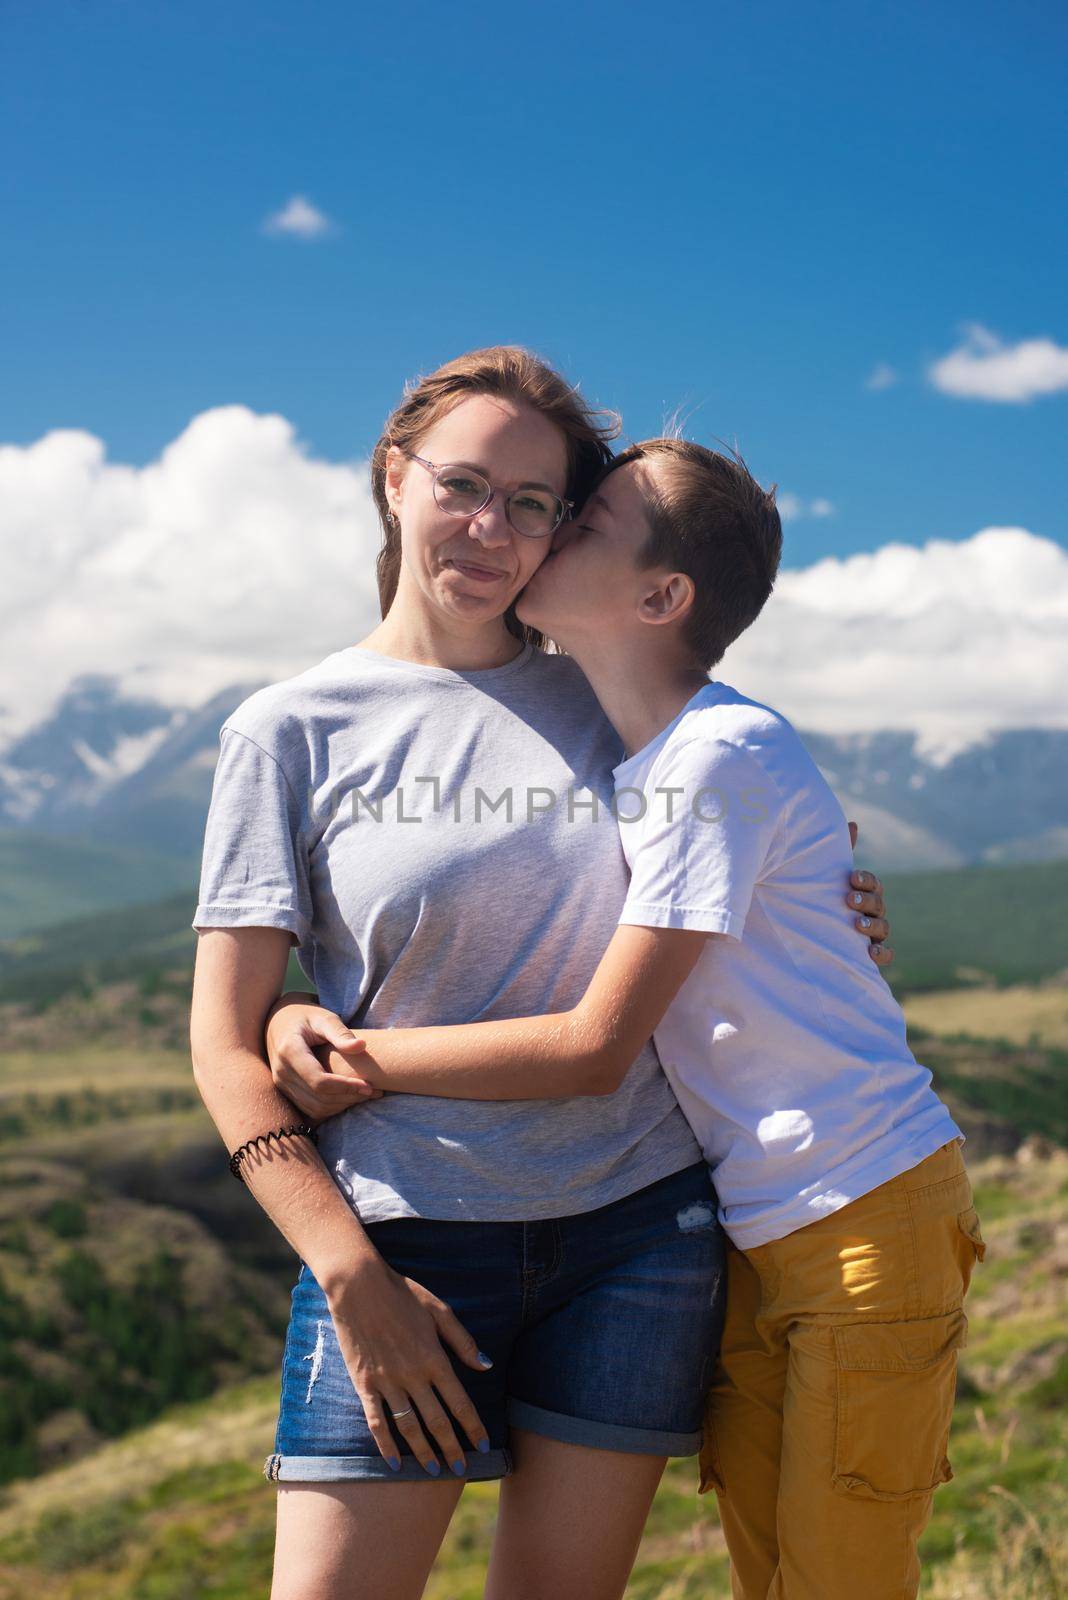 A child embraces mom in the mountain trip by rusak